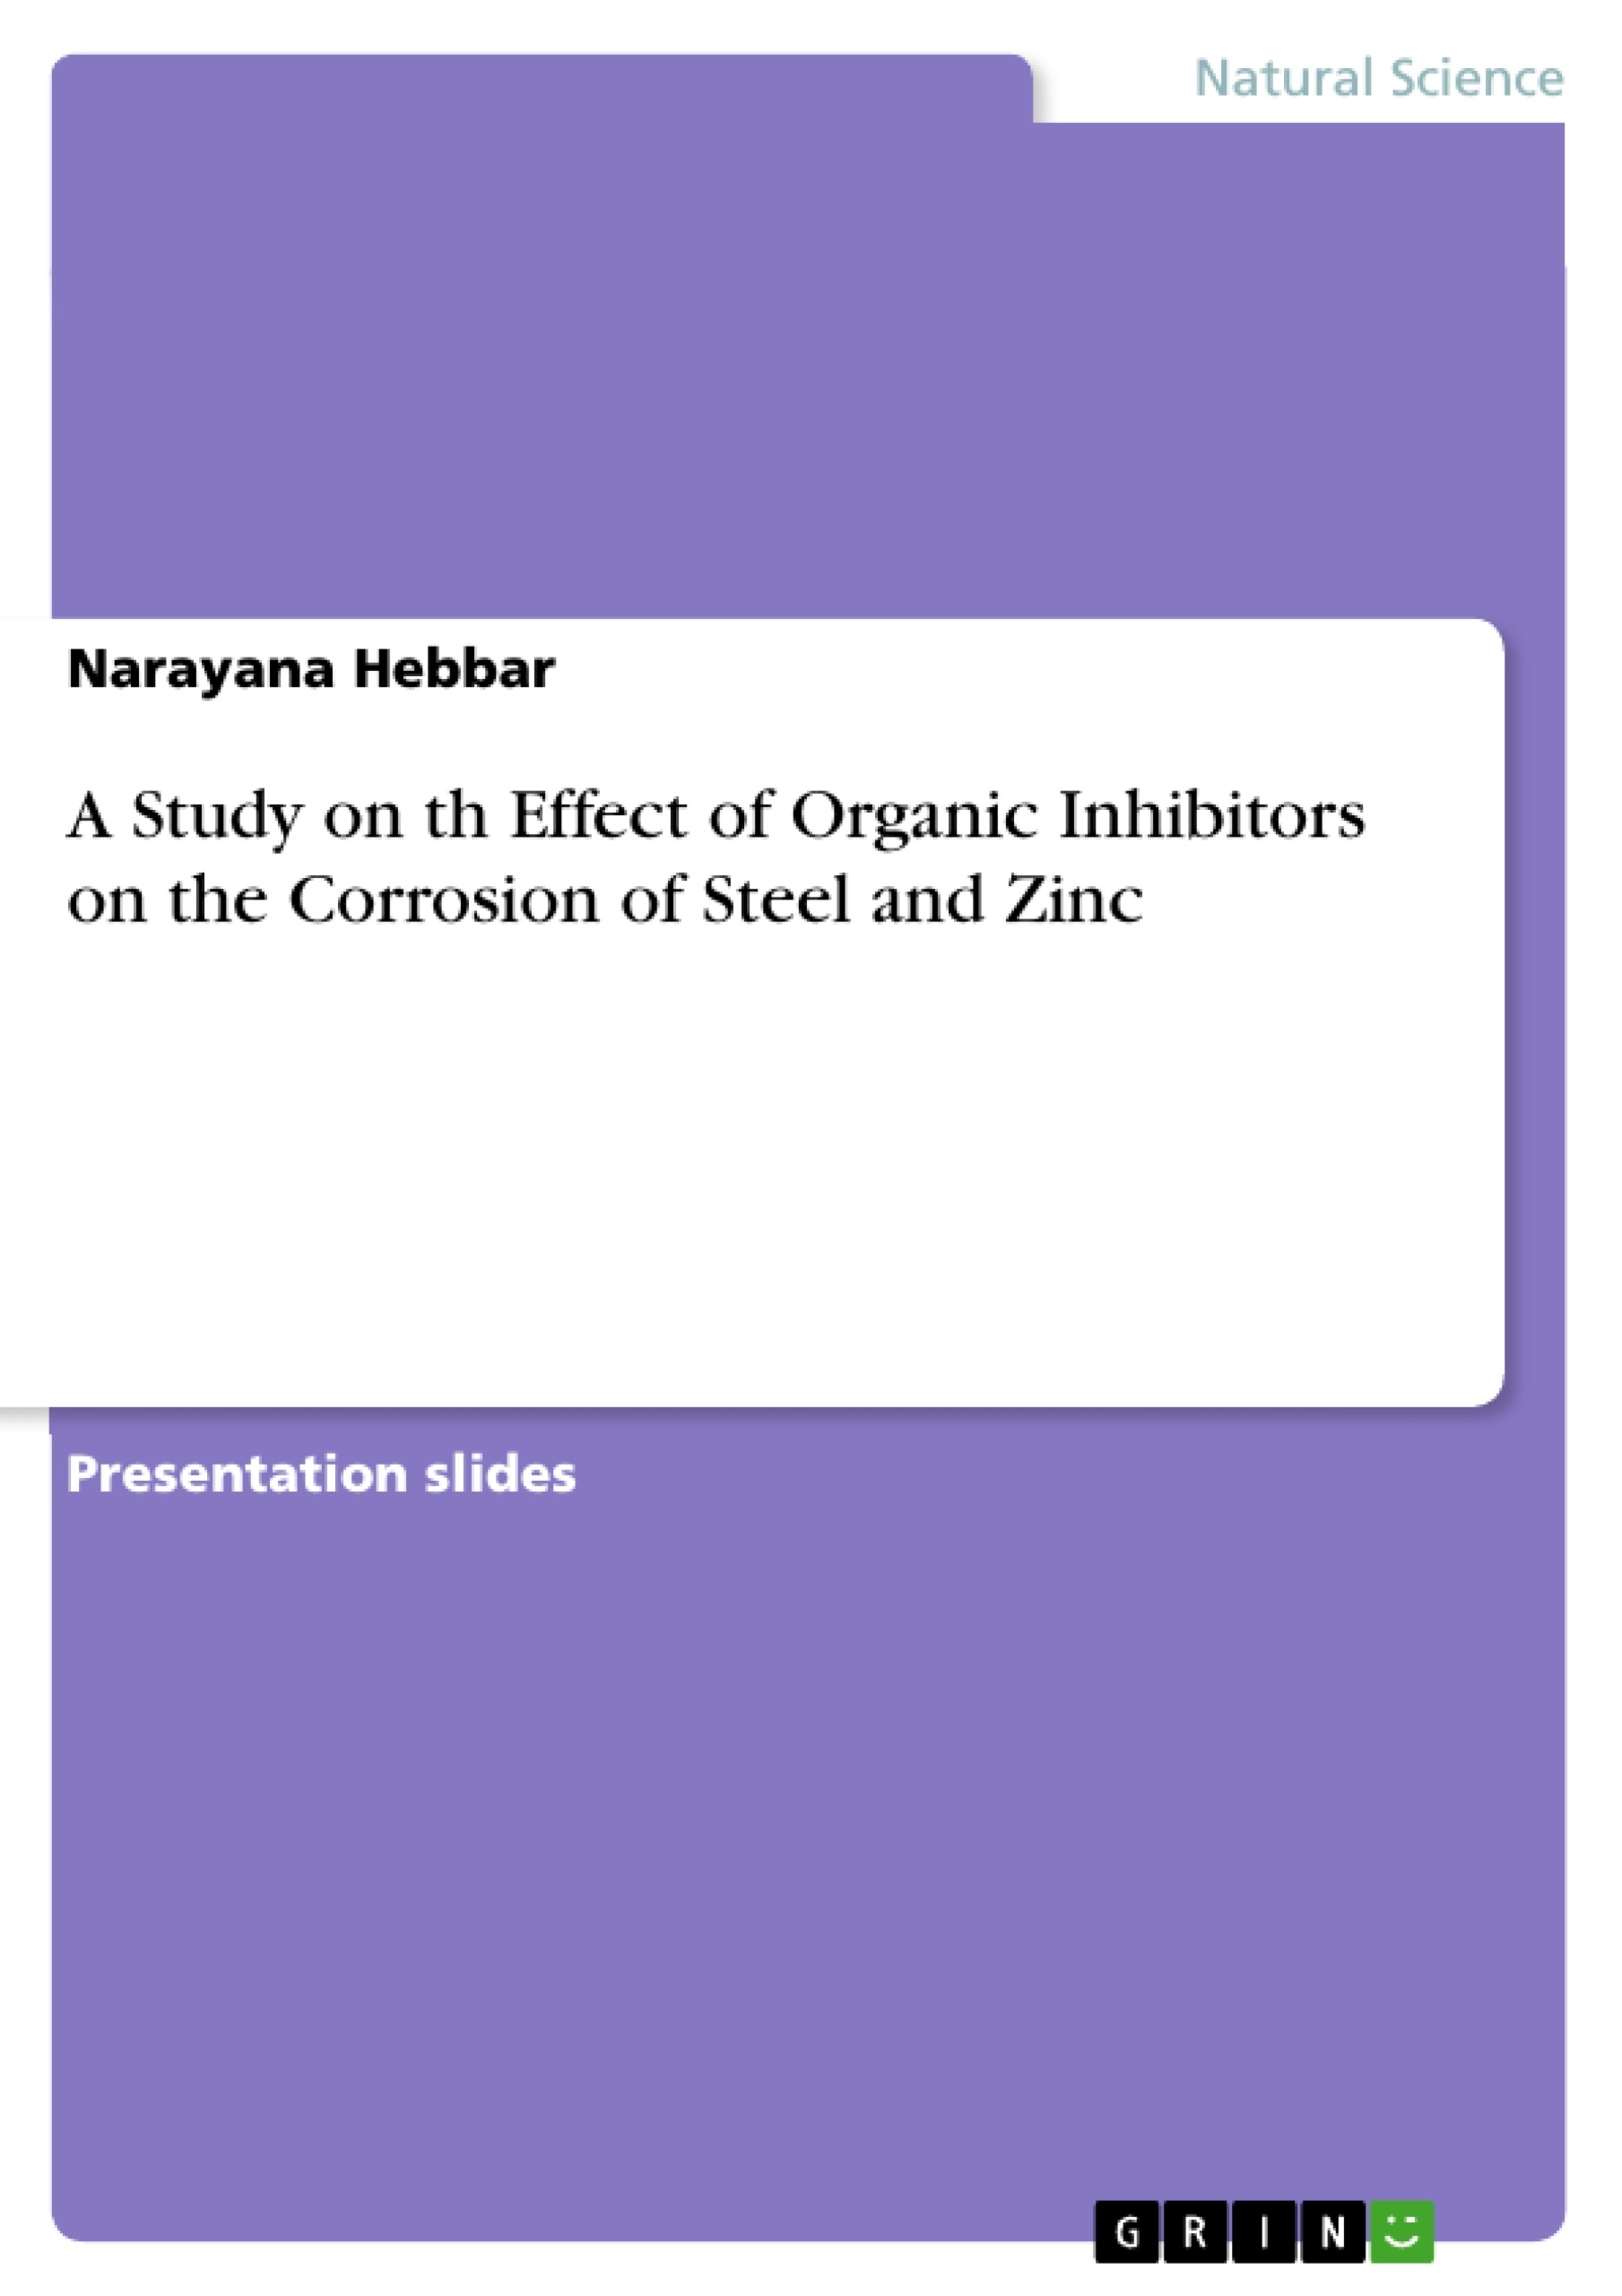 Title: A Study on th Effect of Organic Inhibitors on the Corrosion of Steel and Zinc